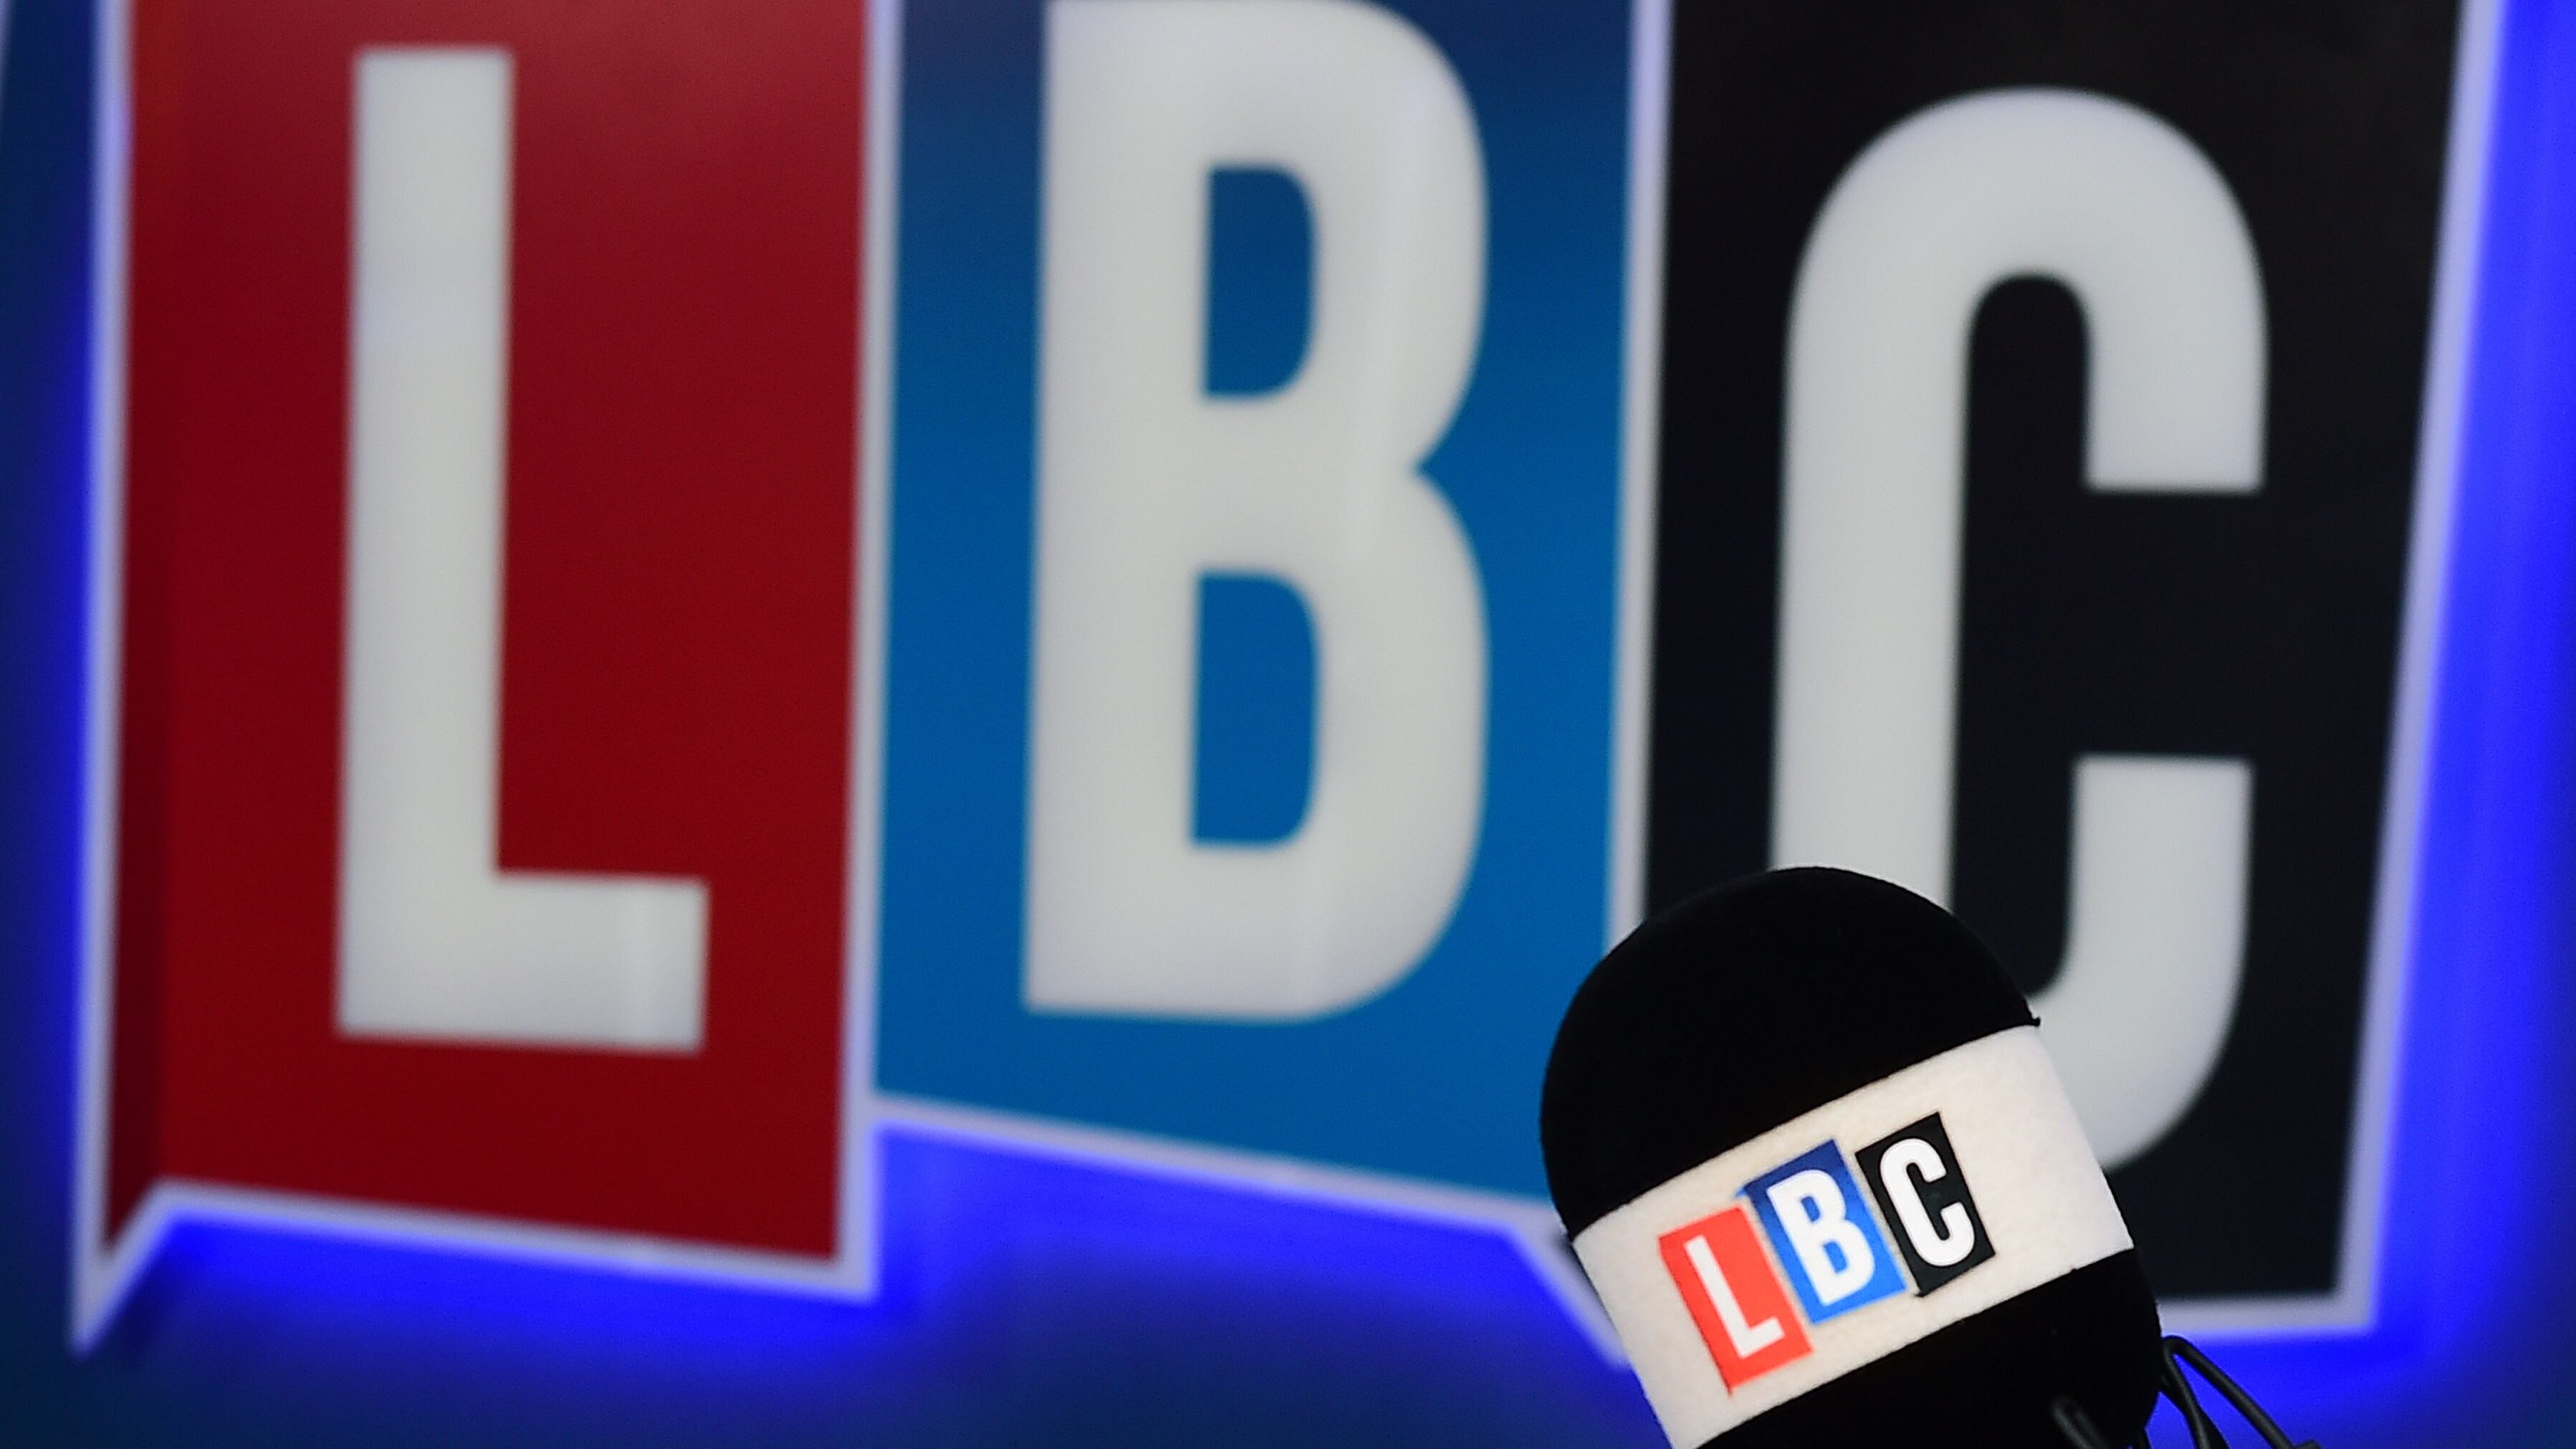 Last week, LBC announced that Sangita Myska would be leaving at the end of her contract